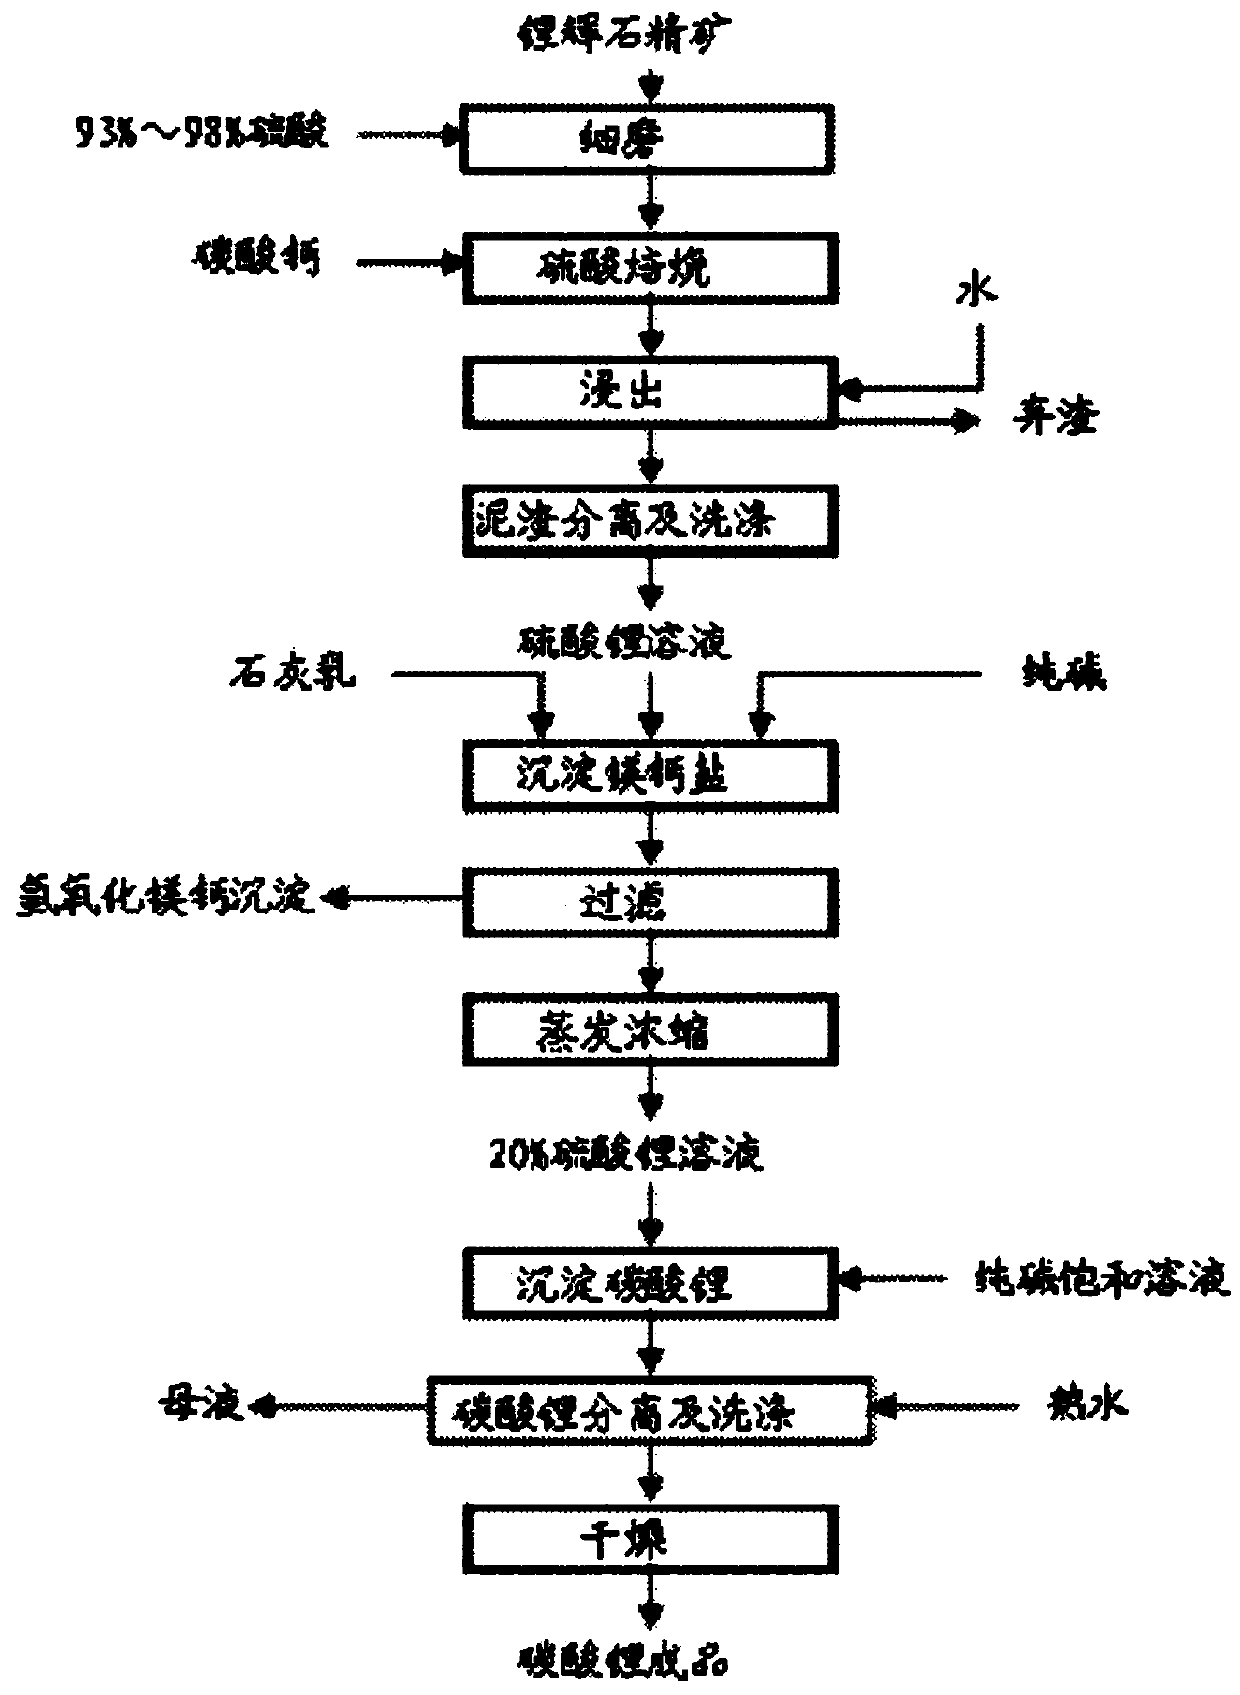 Method and system for purification and concentration of lithium-containing desorbed solution in alumina plant